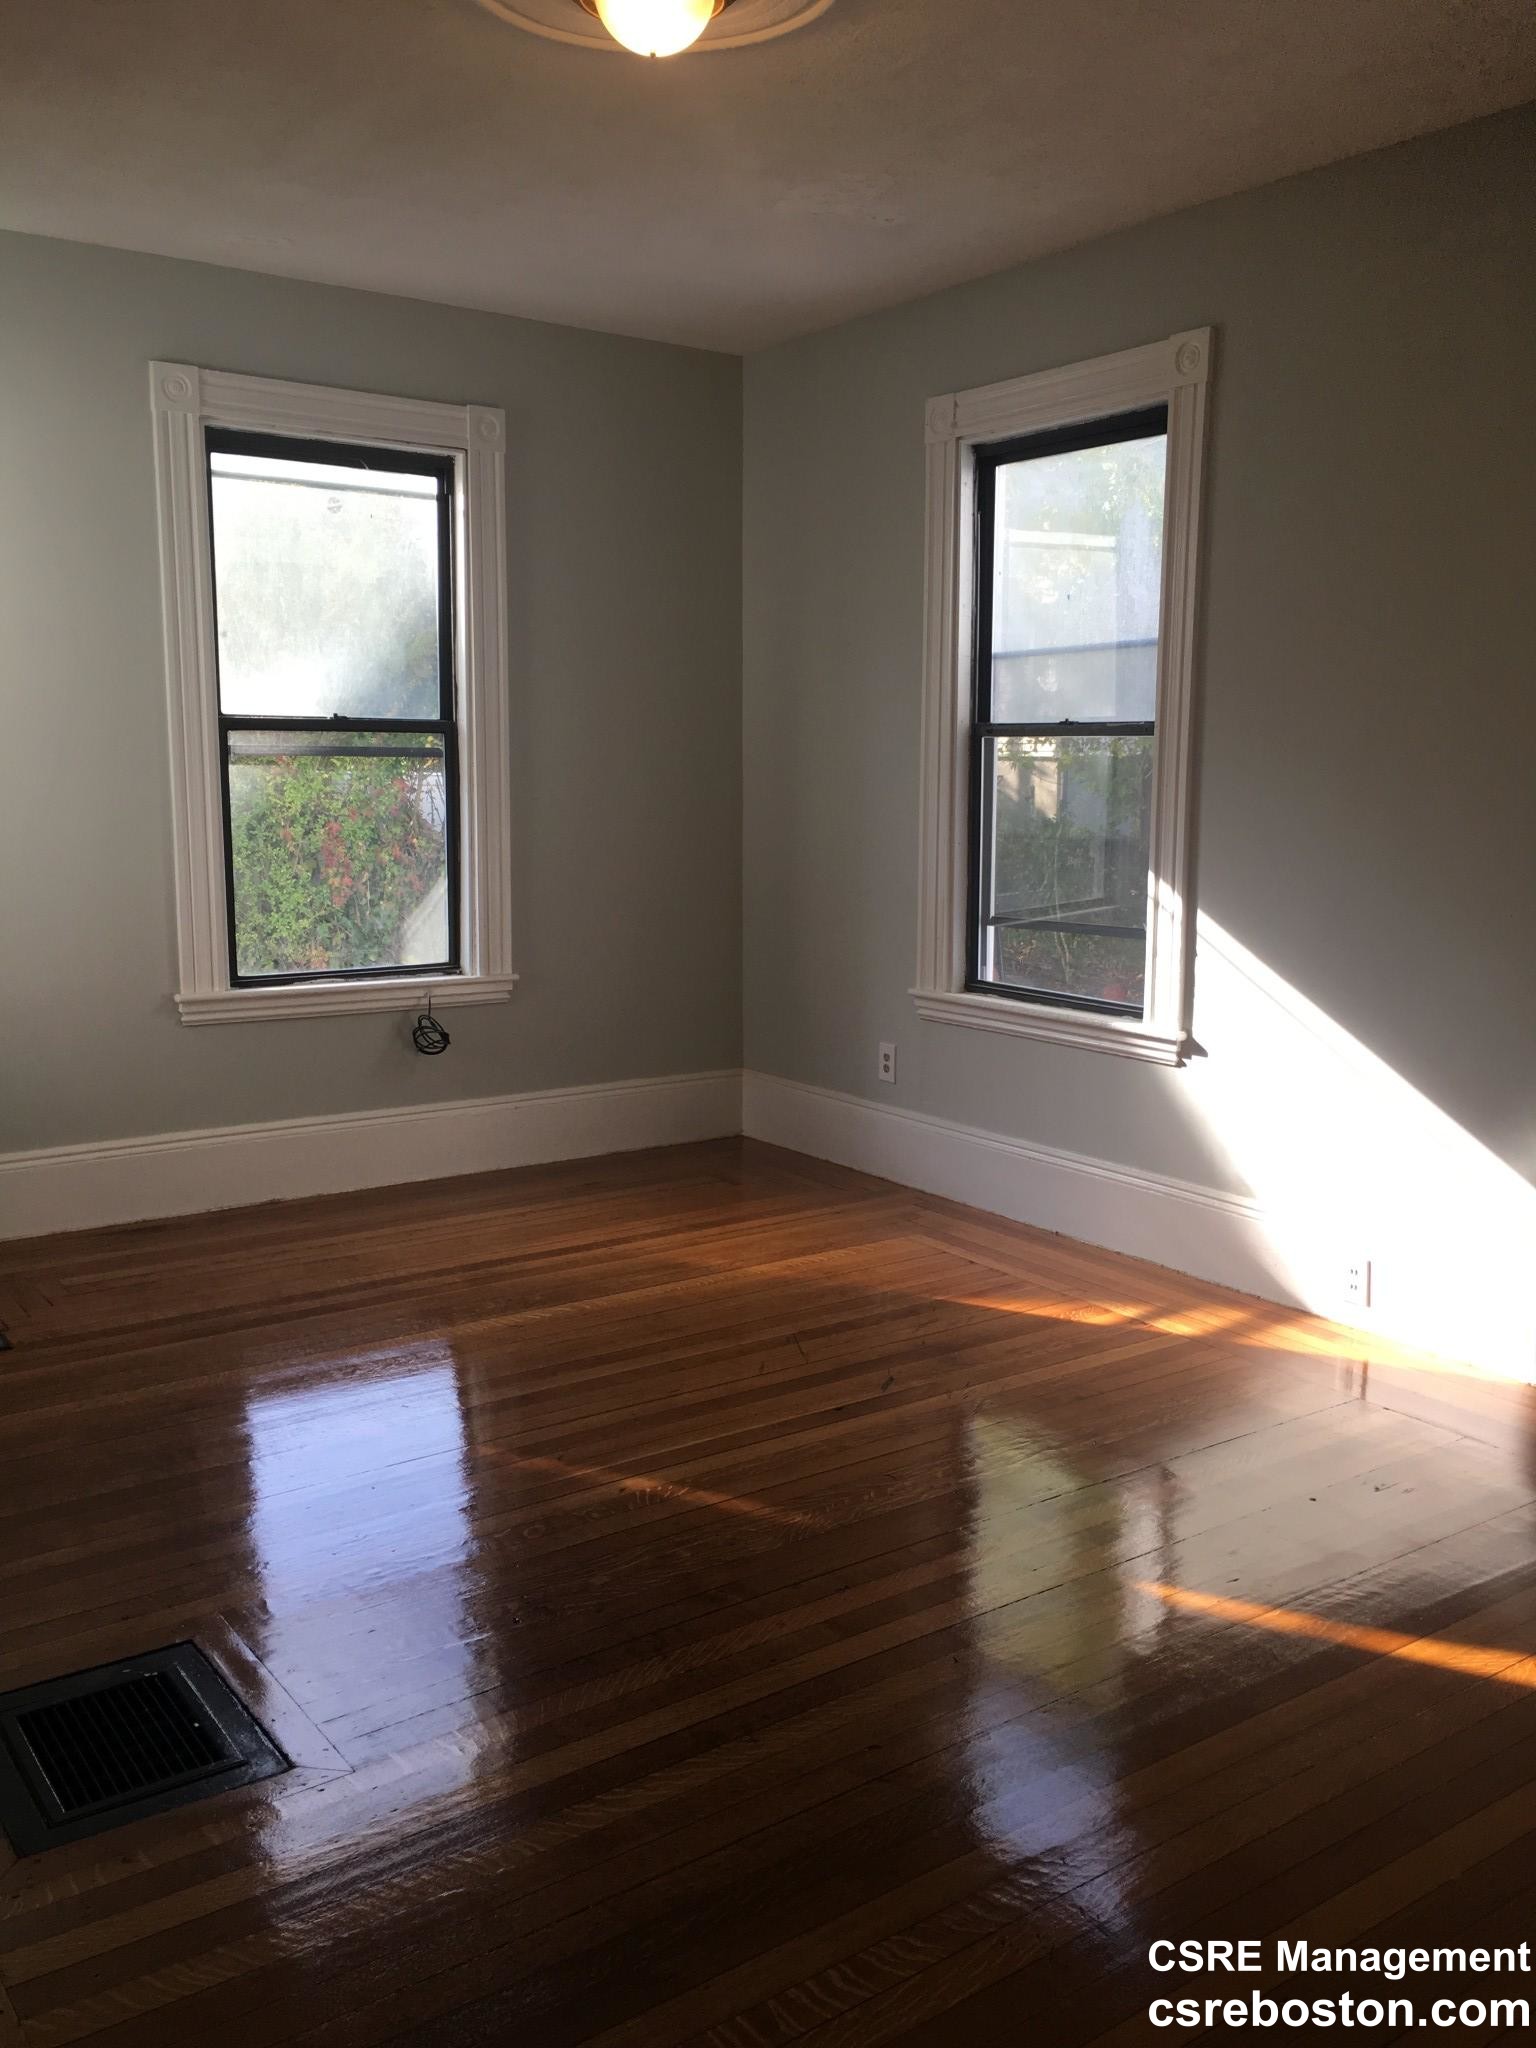 Photos of apartment on Quint Ave.,Boston MA 02134